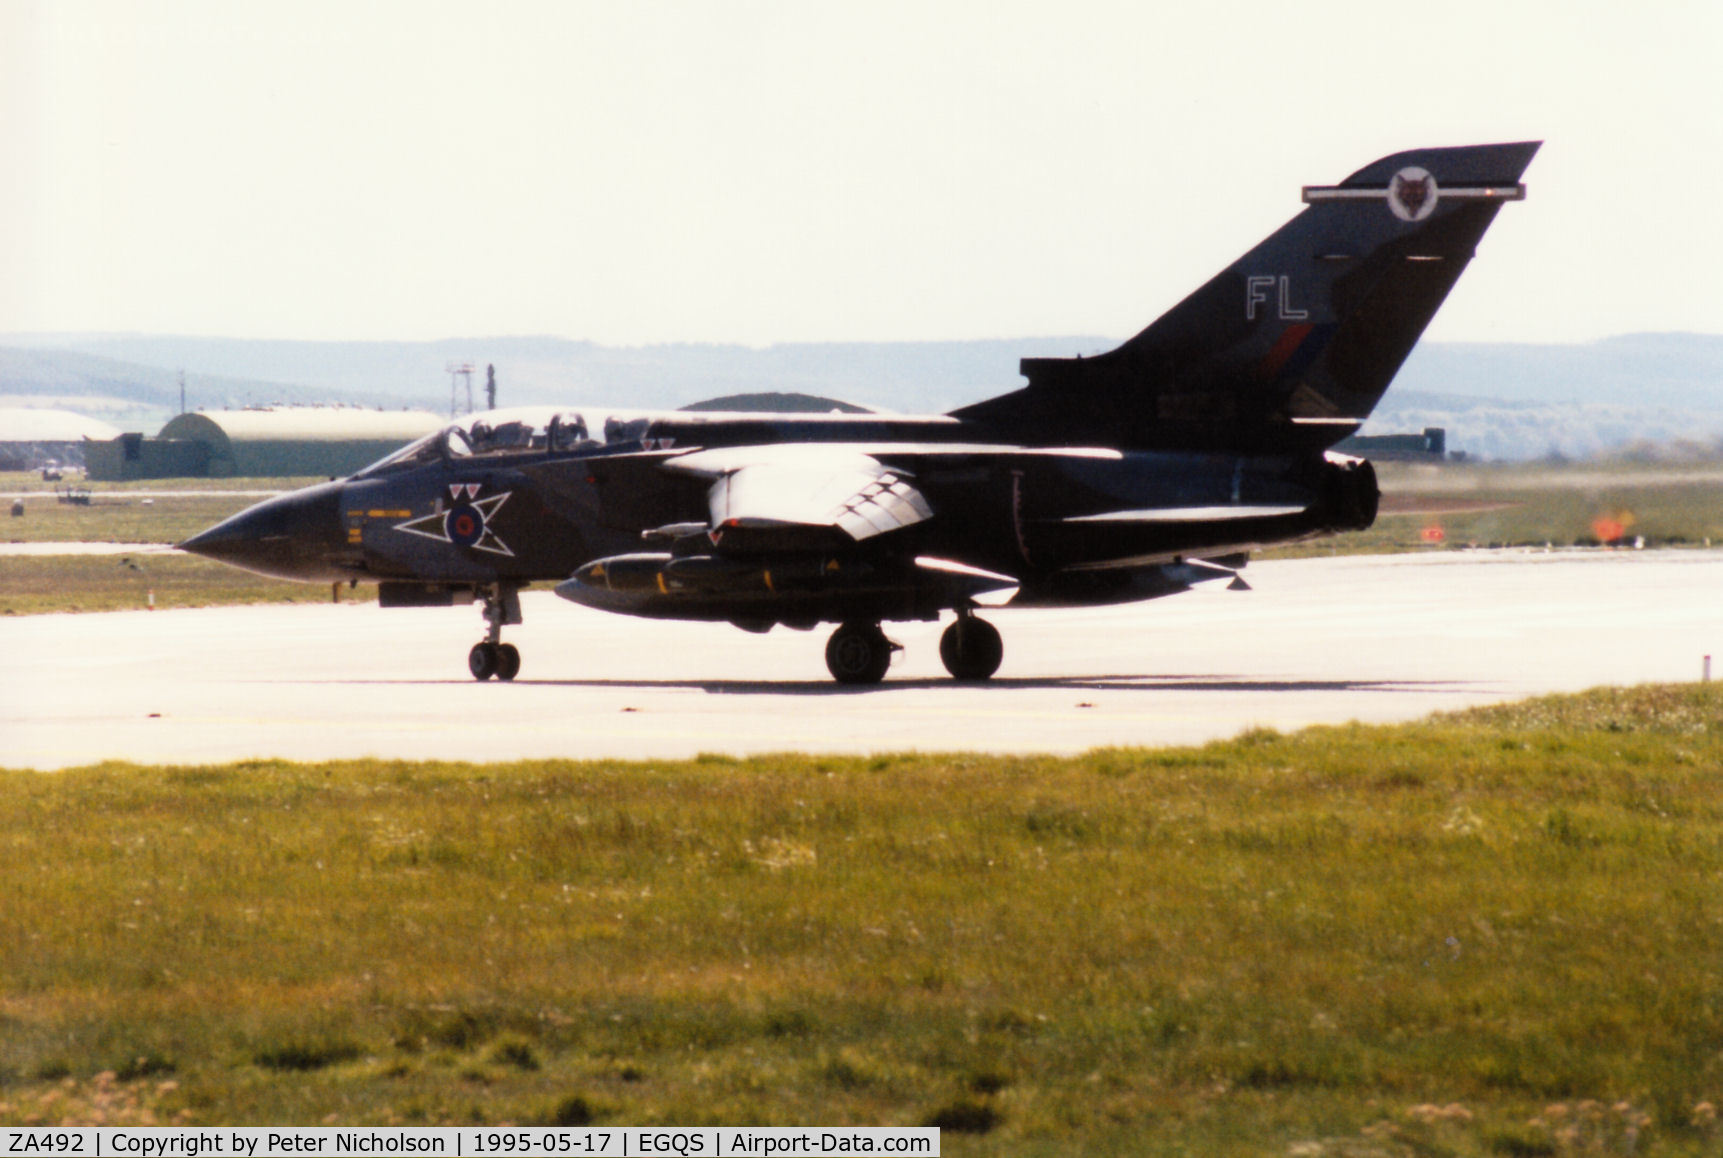 ZA492, 1983 Panavia Tornado GR.1B C/N 310/BS108/3144, Tornado GR.1B of 12 Squadron taxying to the active runway at RAF Lossiemouth in the Summer of 1995.